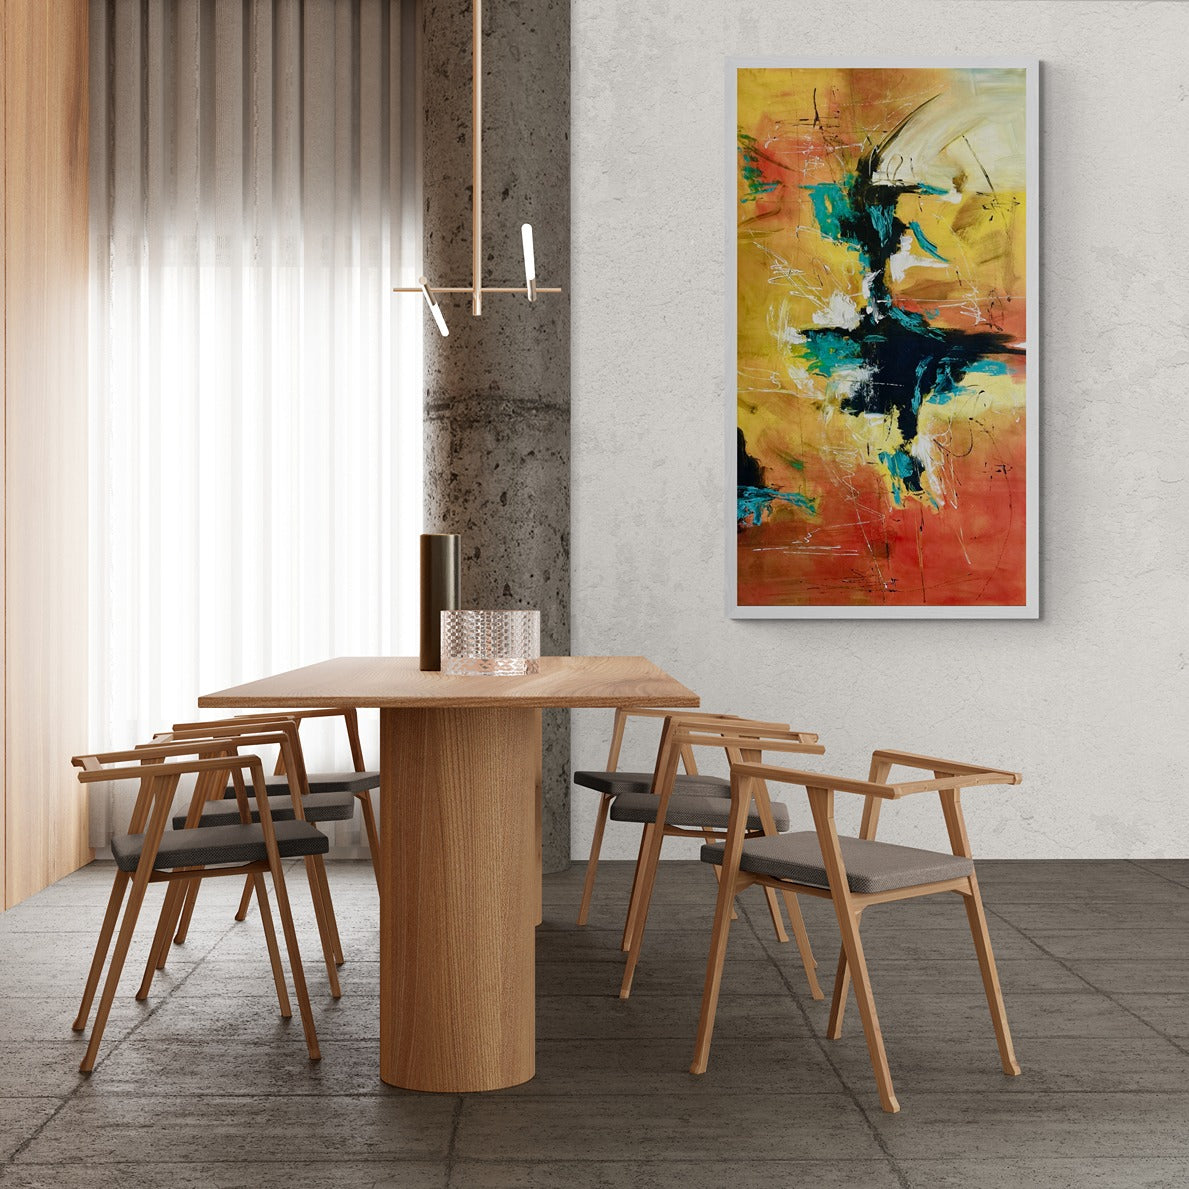 Original hand-painted abstract canvas wall art adds artistic depth to a dining room adorned with modern wooden furniture, enhancing the contemporary ambiance.